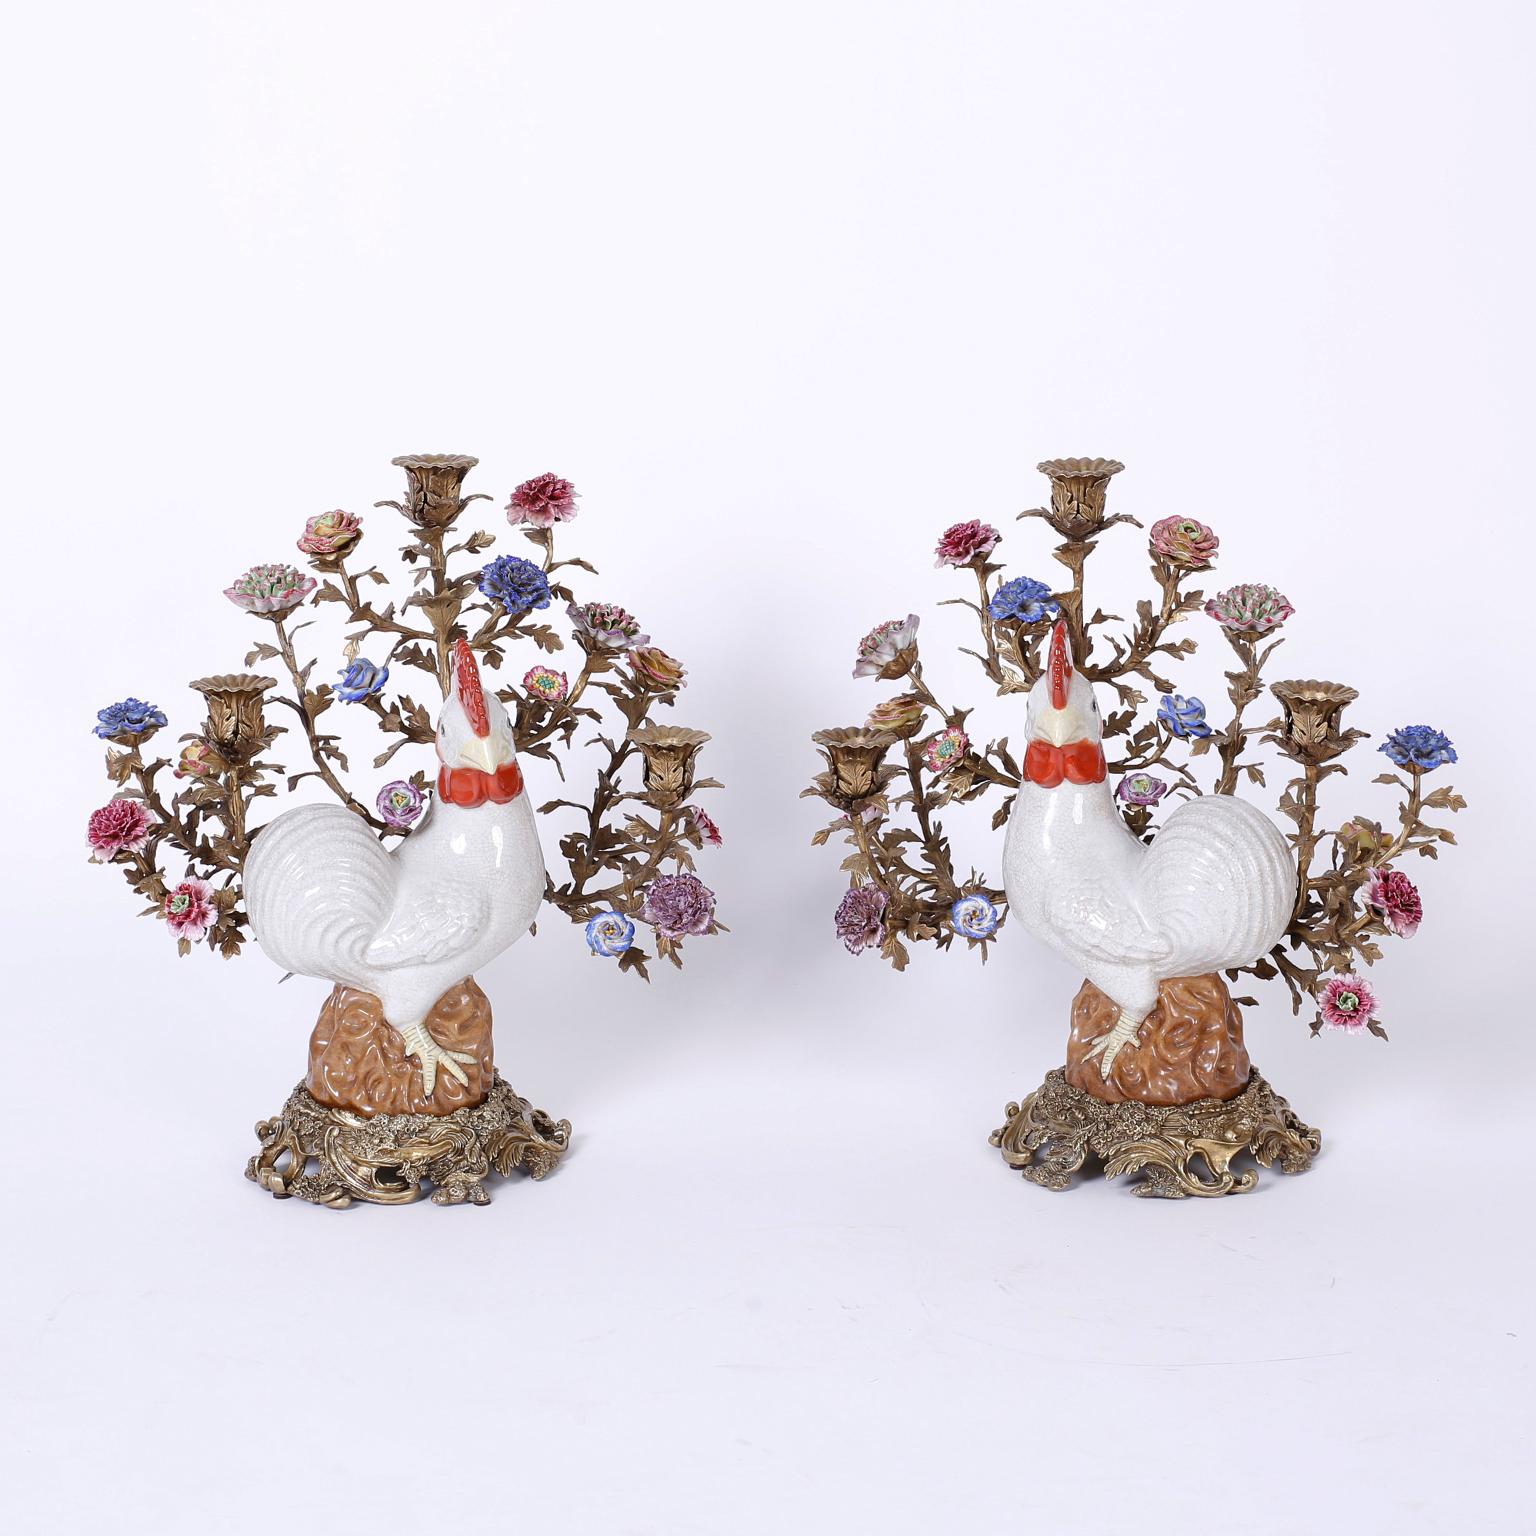 Fanciful pair of three-light candelabra featuring porcelain chickens with an amusing continuance, bronze arms in the form of branches with candle cups and delicate porcelain flowers and floral cast bronze bases.